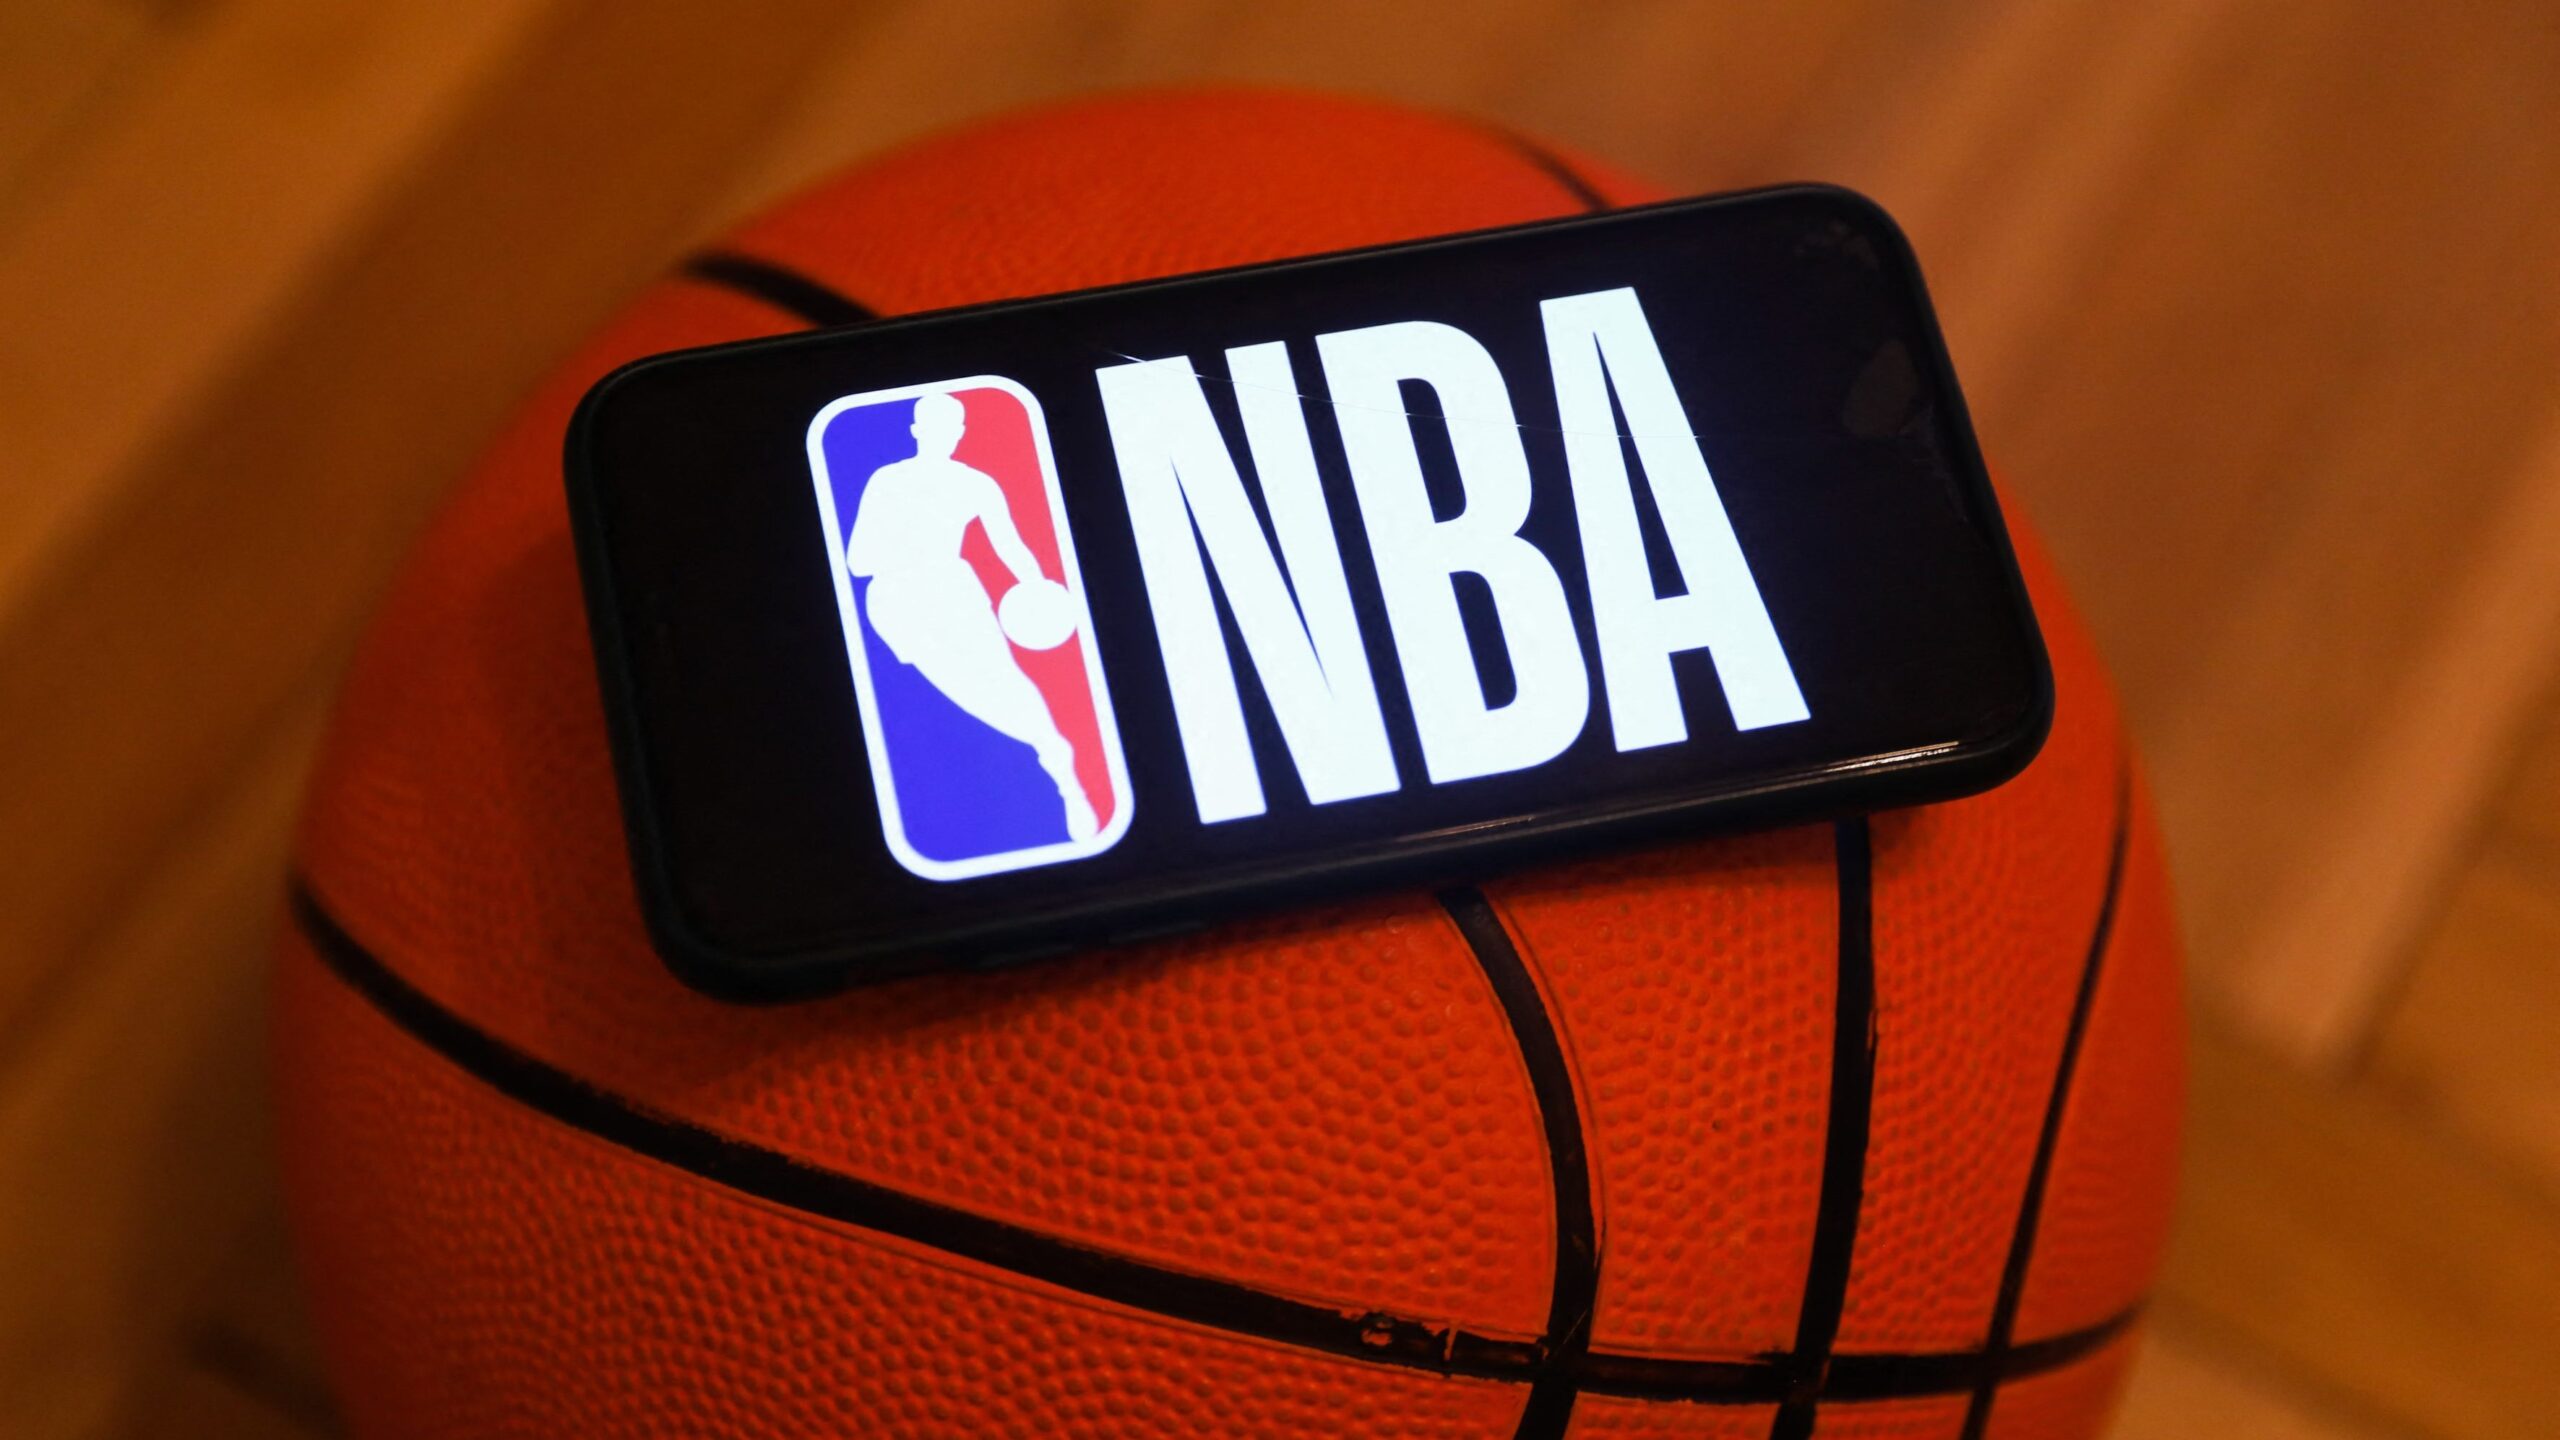 Here's How Filipino Fans Can Watch The NBA From Anywhere